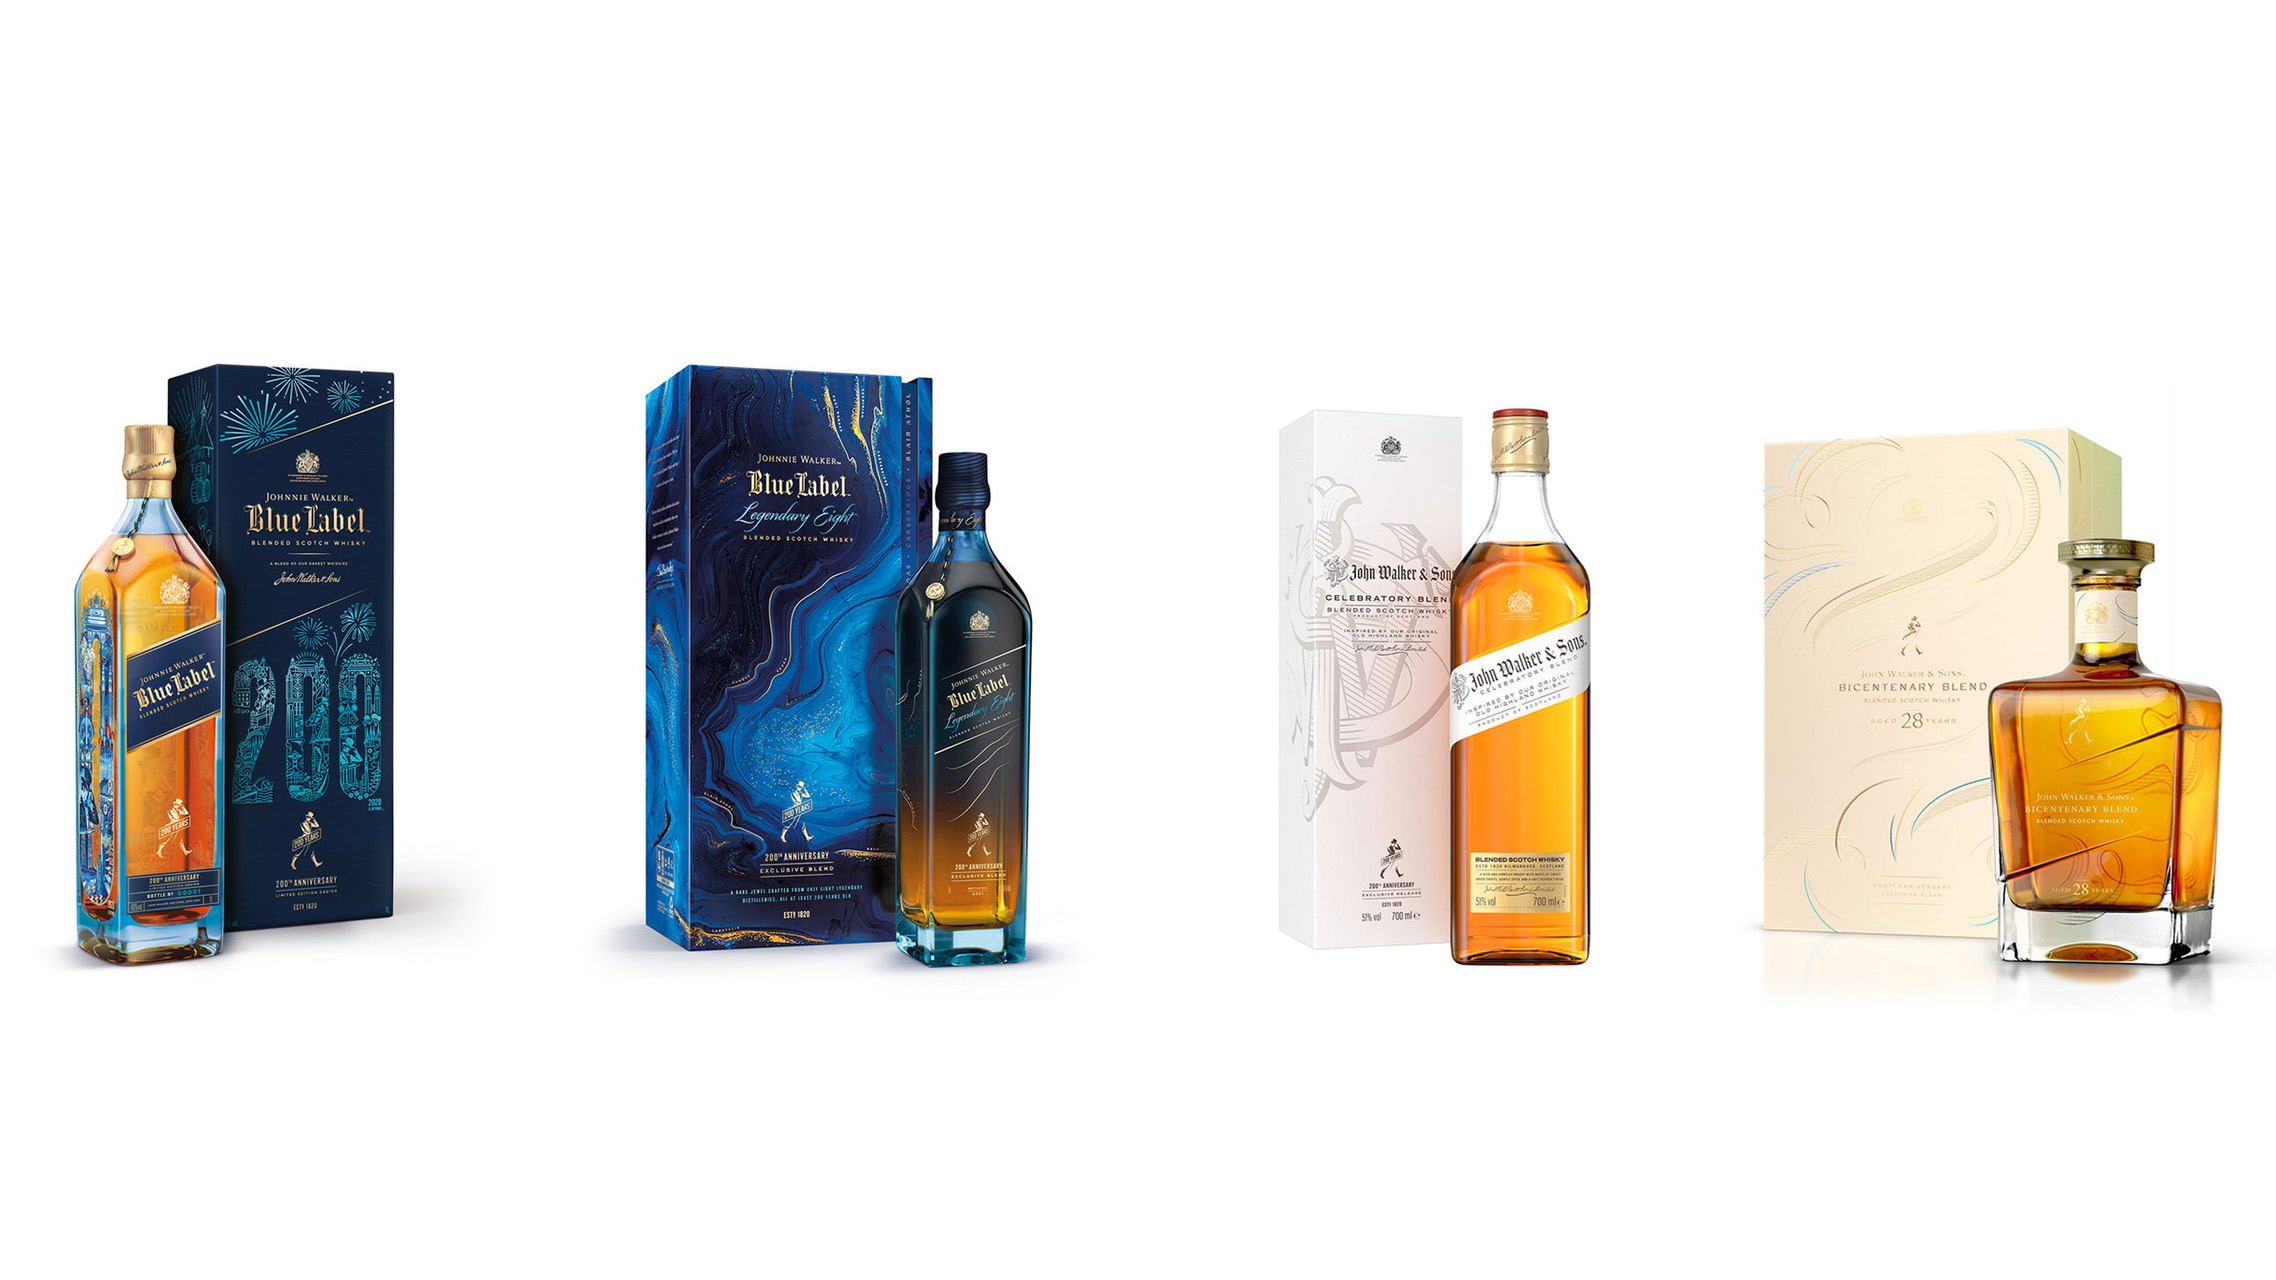 Johnnie Walker Unveils Blue Label Legendary Eight, Celebratory Blend, And Bicentenary Blend Limited Edition Scotch Whiskies To Celebrate 200th Anniversary